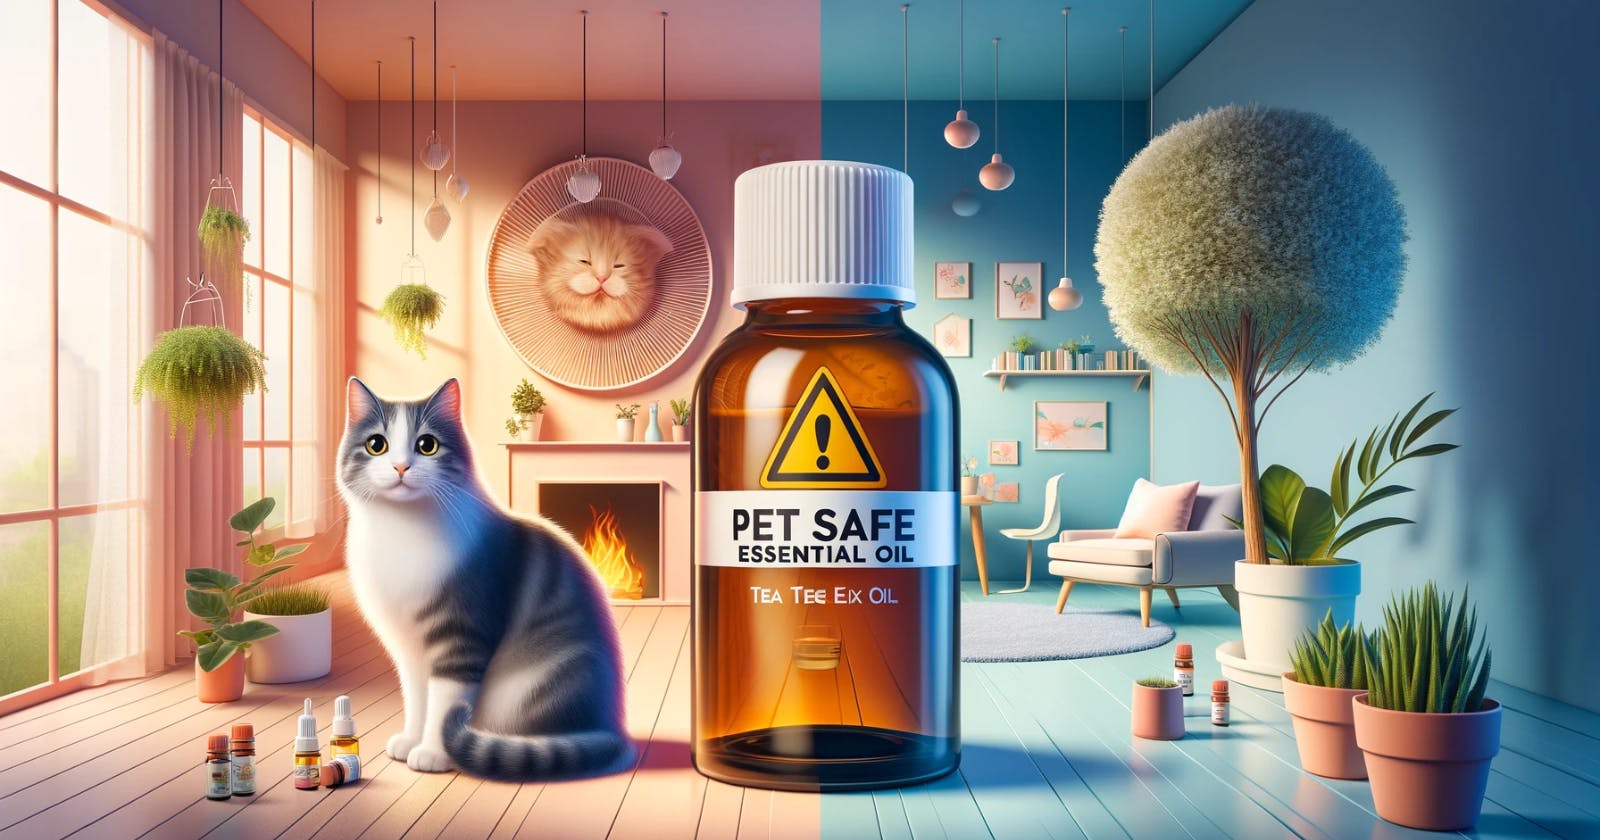 Is Tea Tree Oil Safe for Cats?